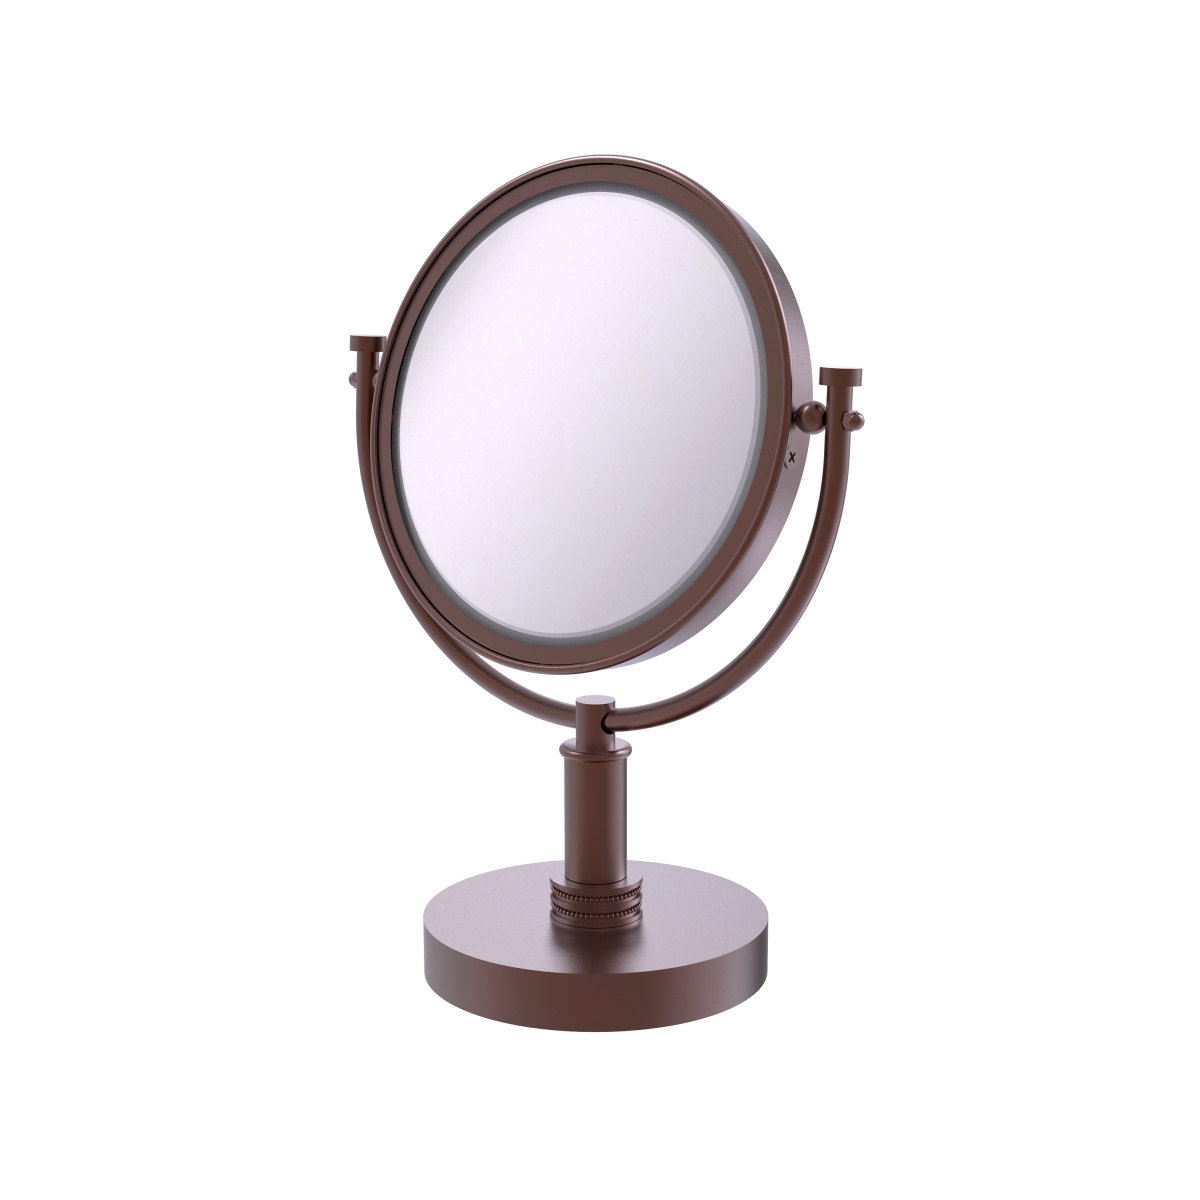 Picture of Allied Brass DM-4D-4X-CA 8 in. Vanity Top Make-Up Mirror 4X Magnification, Antique Copper - 15 x 8 x 8 in.